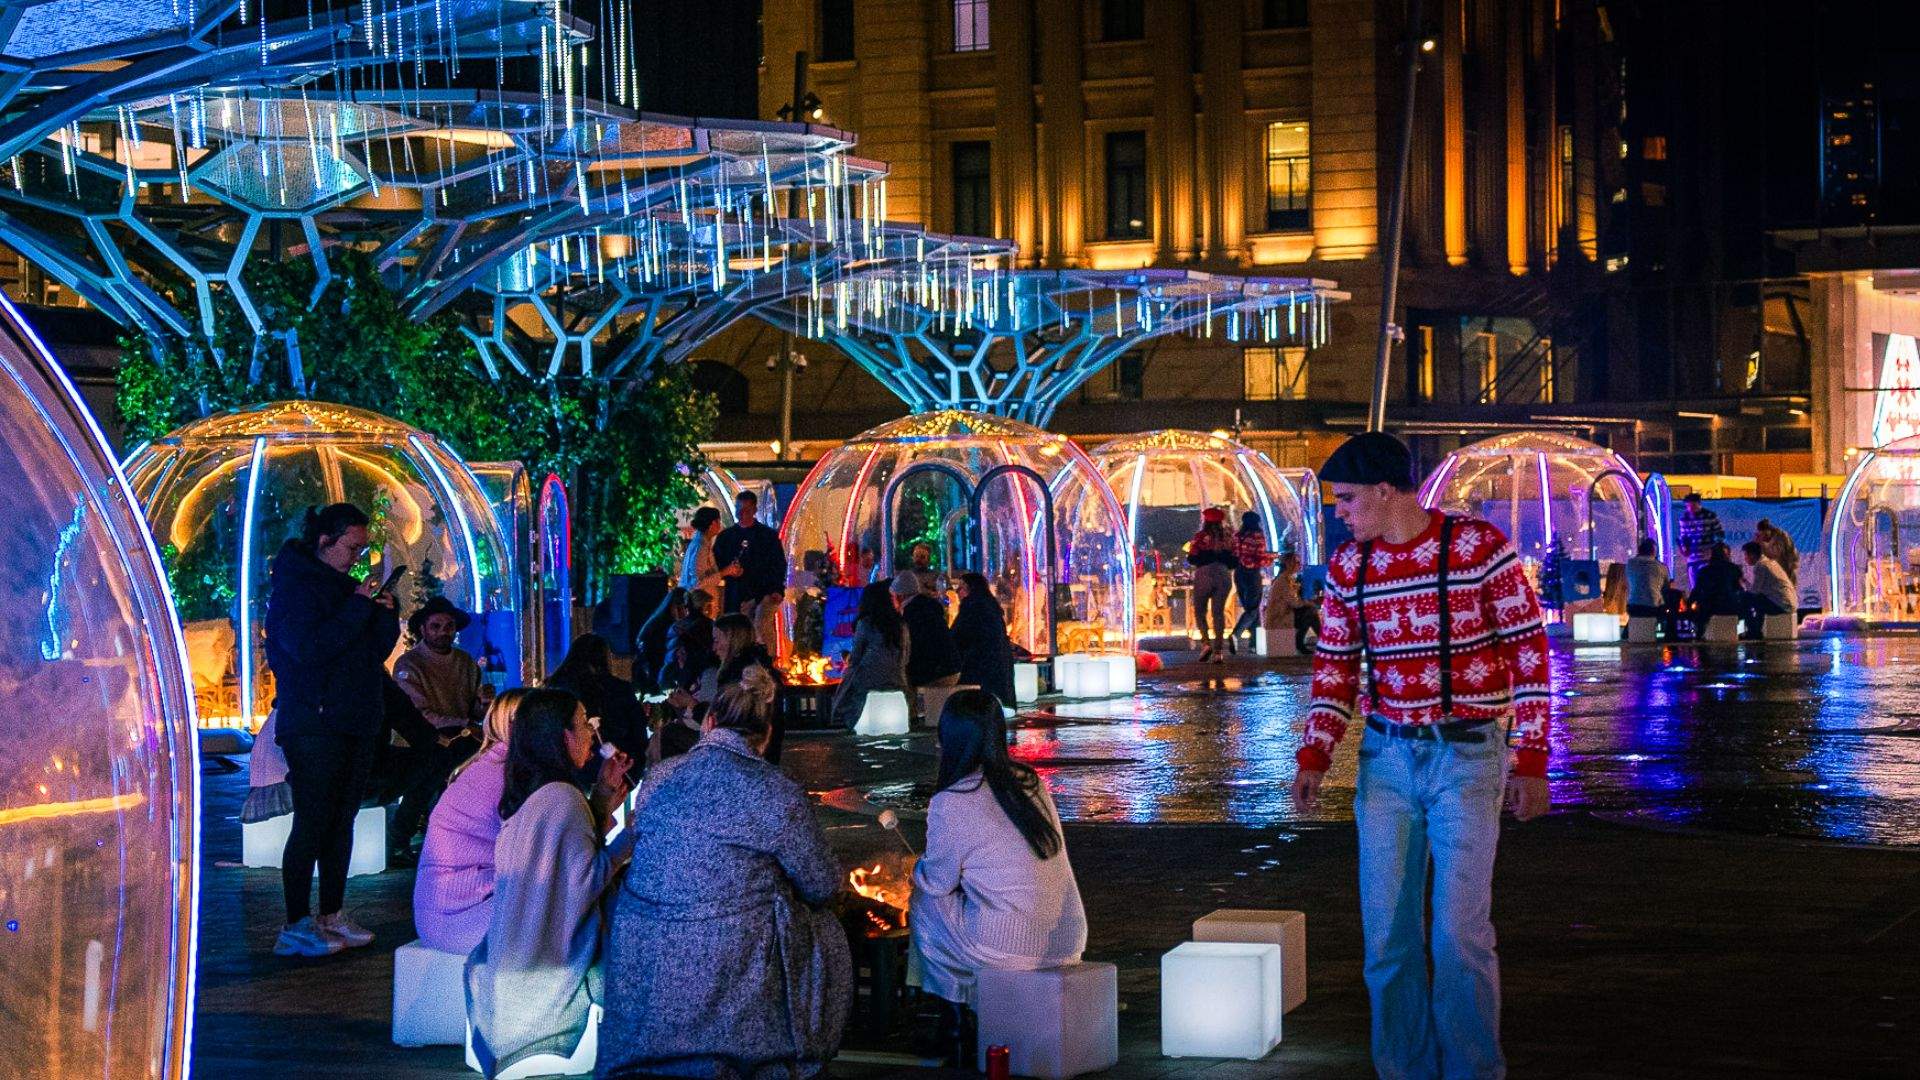 Sydney Is Getting a Pop-Up Winter Wonderland with Private Igloos Serving Raclette and Mulled Wine